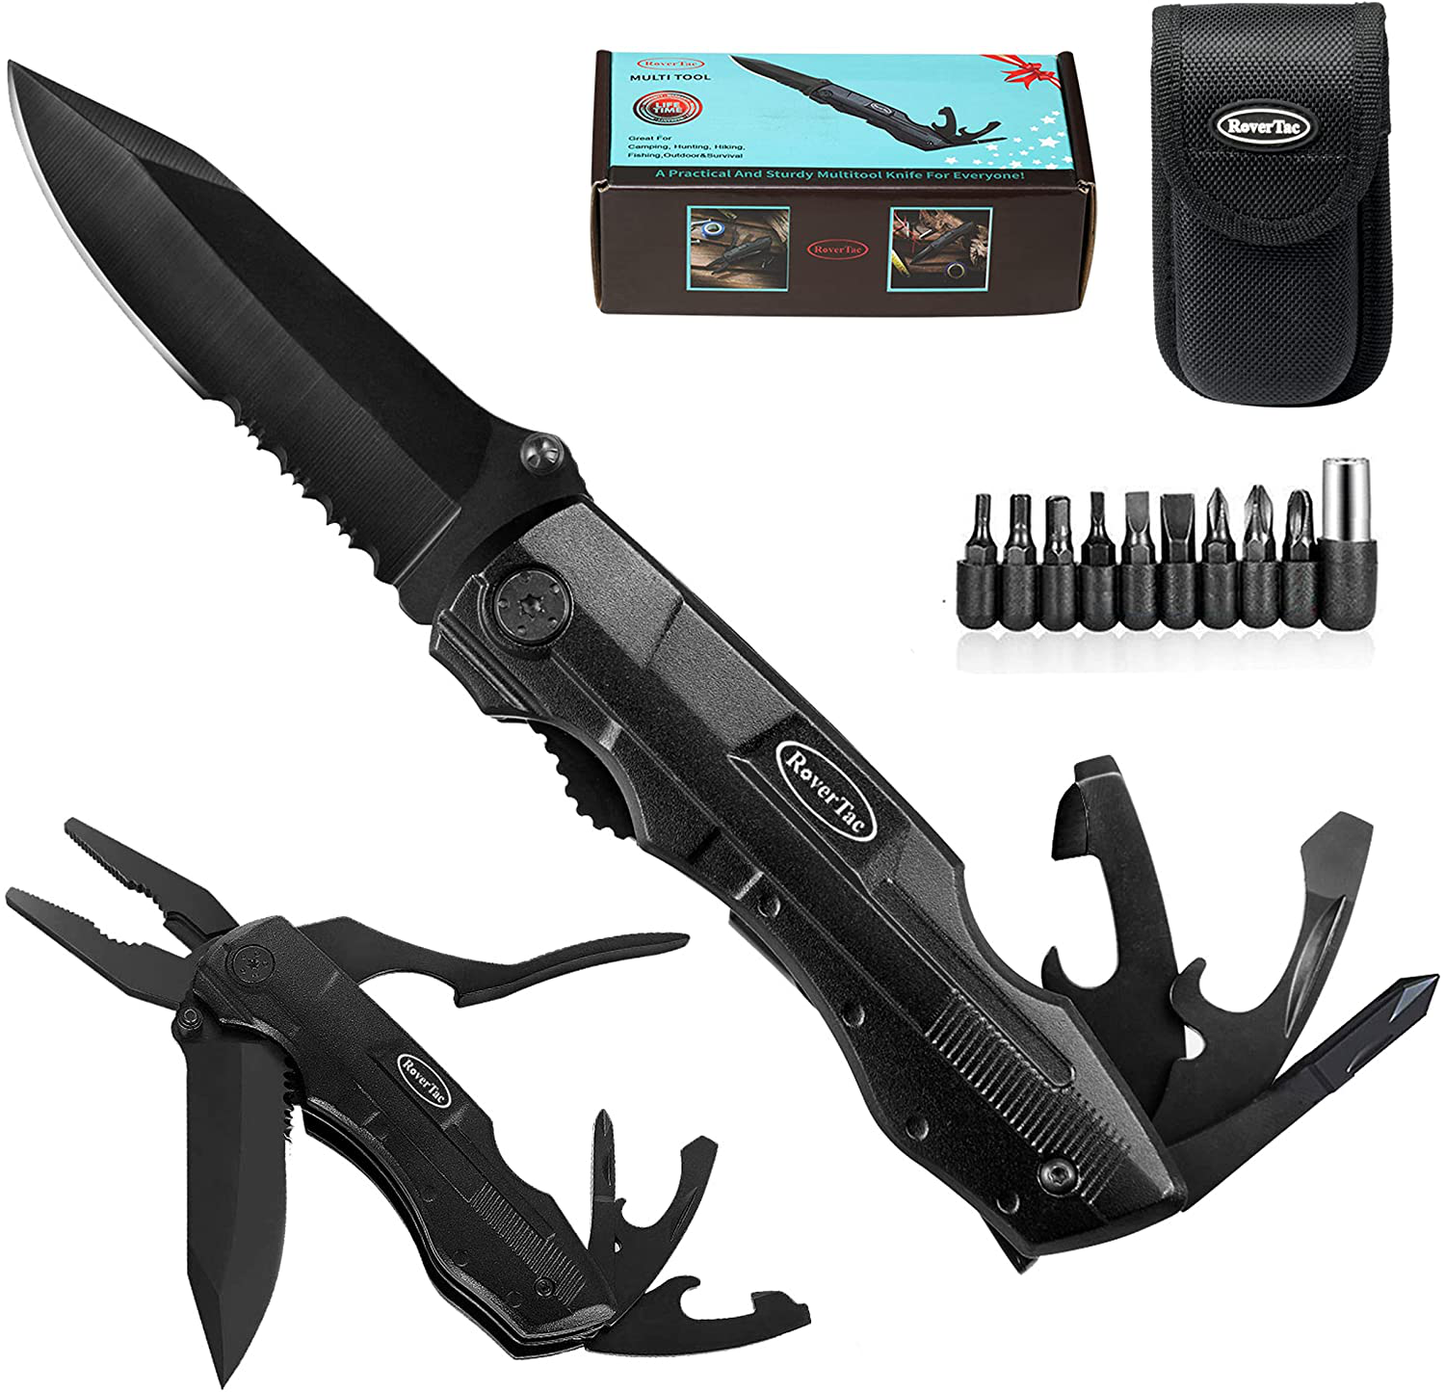 RoverTac Pocket Knife Folding Knife Multitool Knife with Pliers Screwdrivers Bottle Opener Safety Lock Durable Sheath Perfect for Camping Fishing Hiking Outdoor Unique Gifts for men women